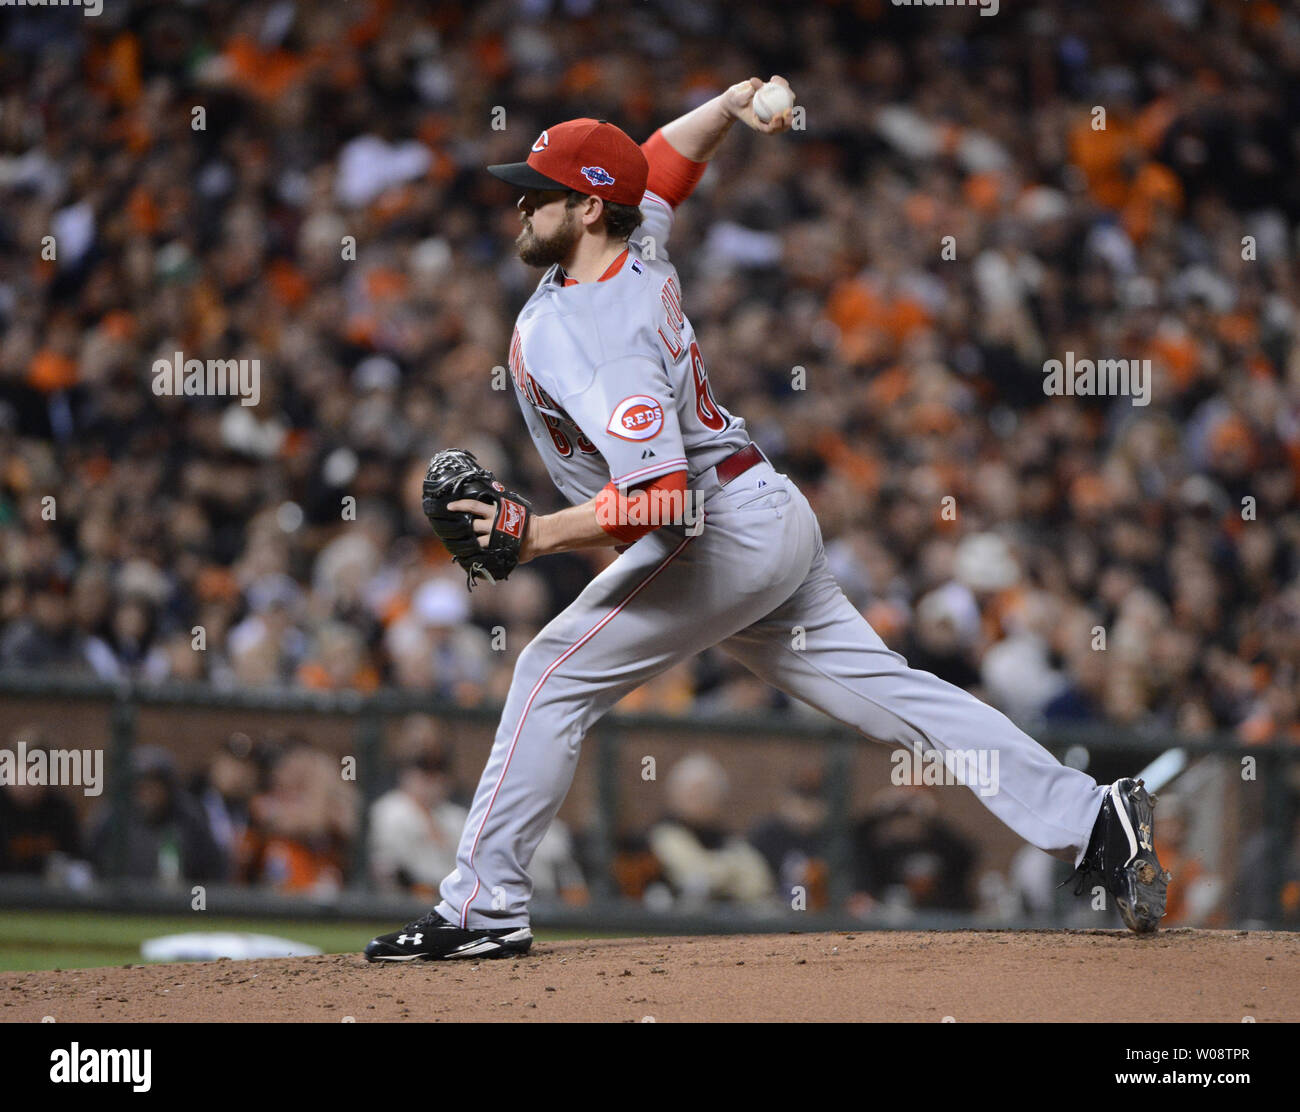 Cincinnati Reds Sam LeCure throws in the first inning after coming in to relieve starter Johnny Cueto in the National League Divisional Series against the San Francisco Giants at AT&T Park in San Francisco on October 6, 2012.   UPI/Terry Schmitt Stock Photo